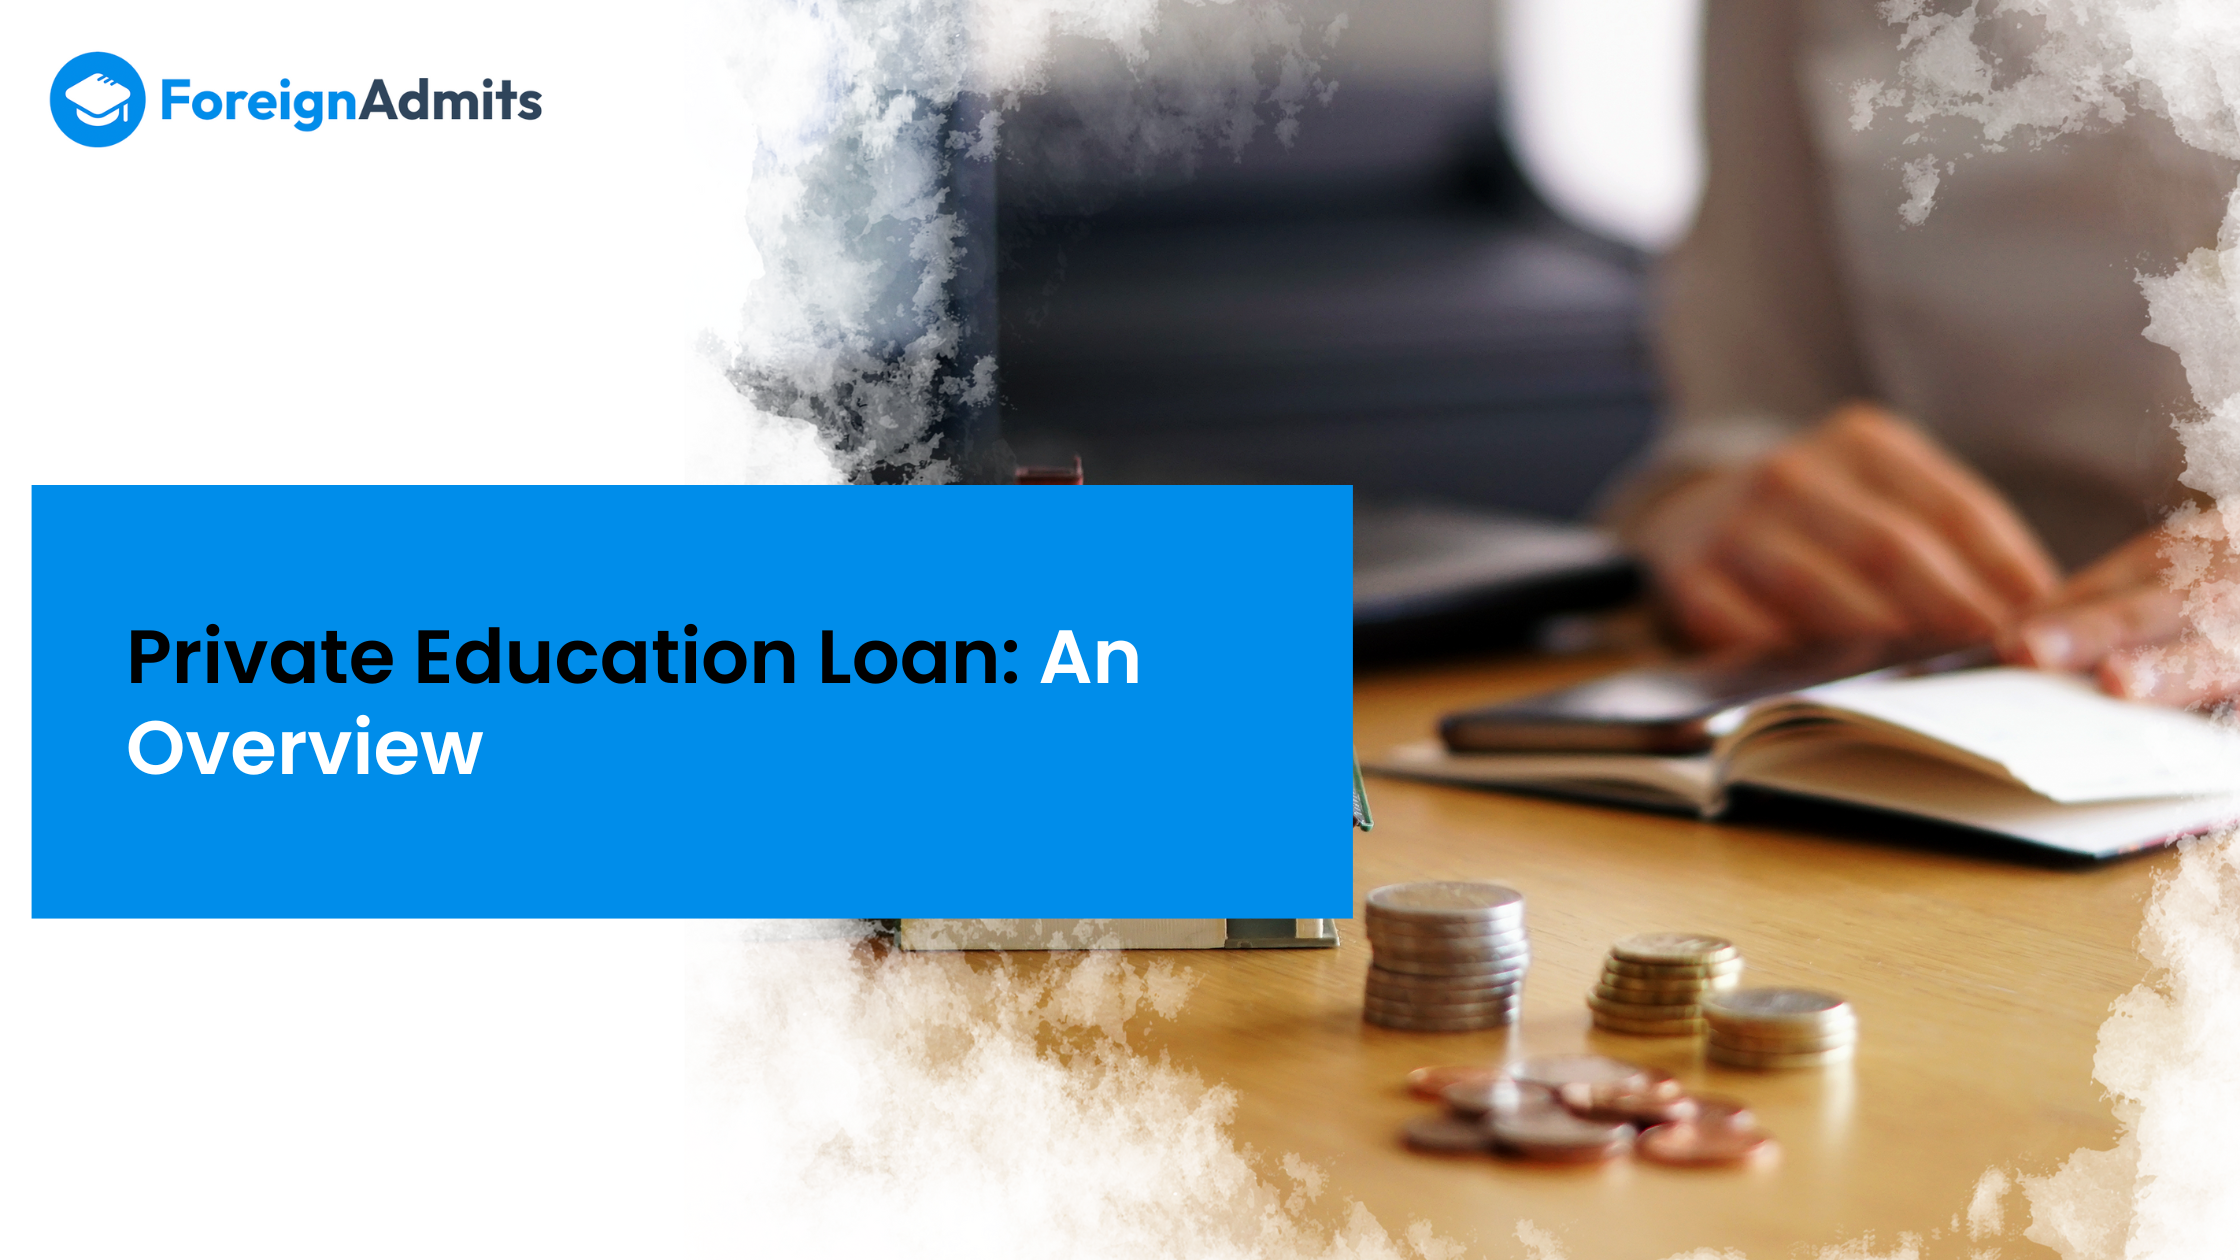 Private Education Loan: An Overview